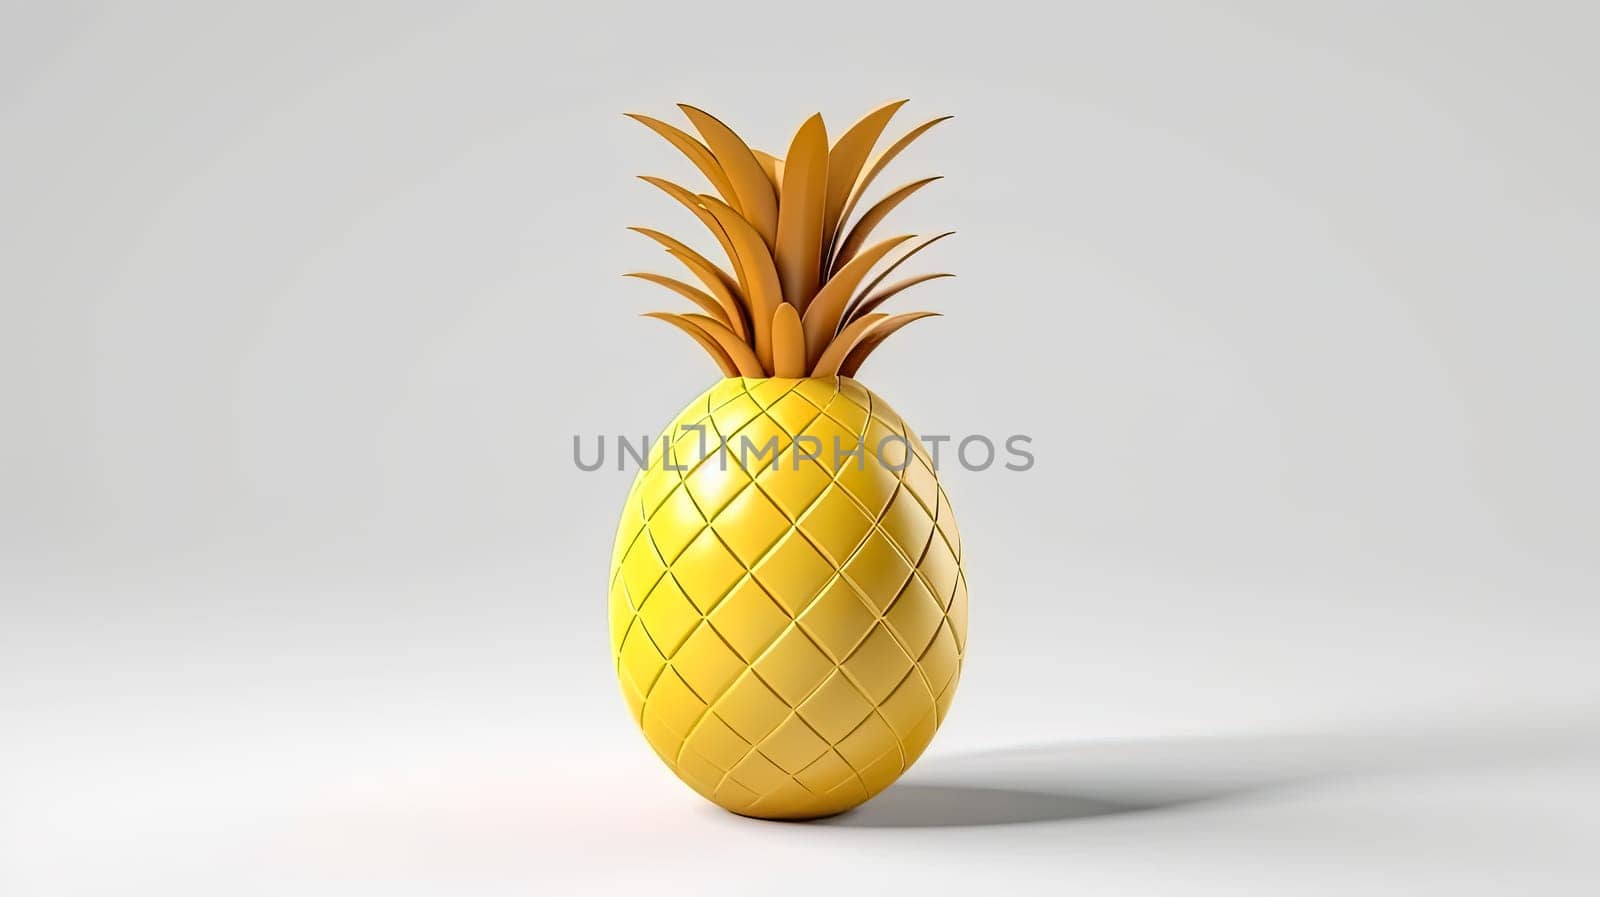 Luscious 3D rendering of a fresh, ripe pineapple in clay style, embodying the essence of tropical goodness. Vibrant and enticing on a clean white backdrop.